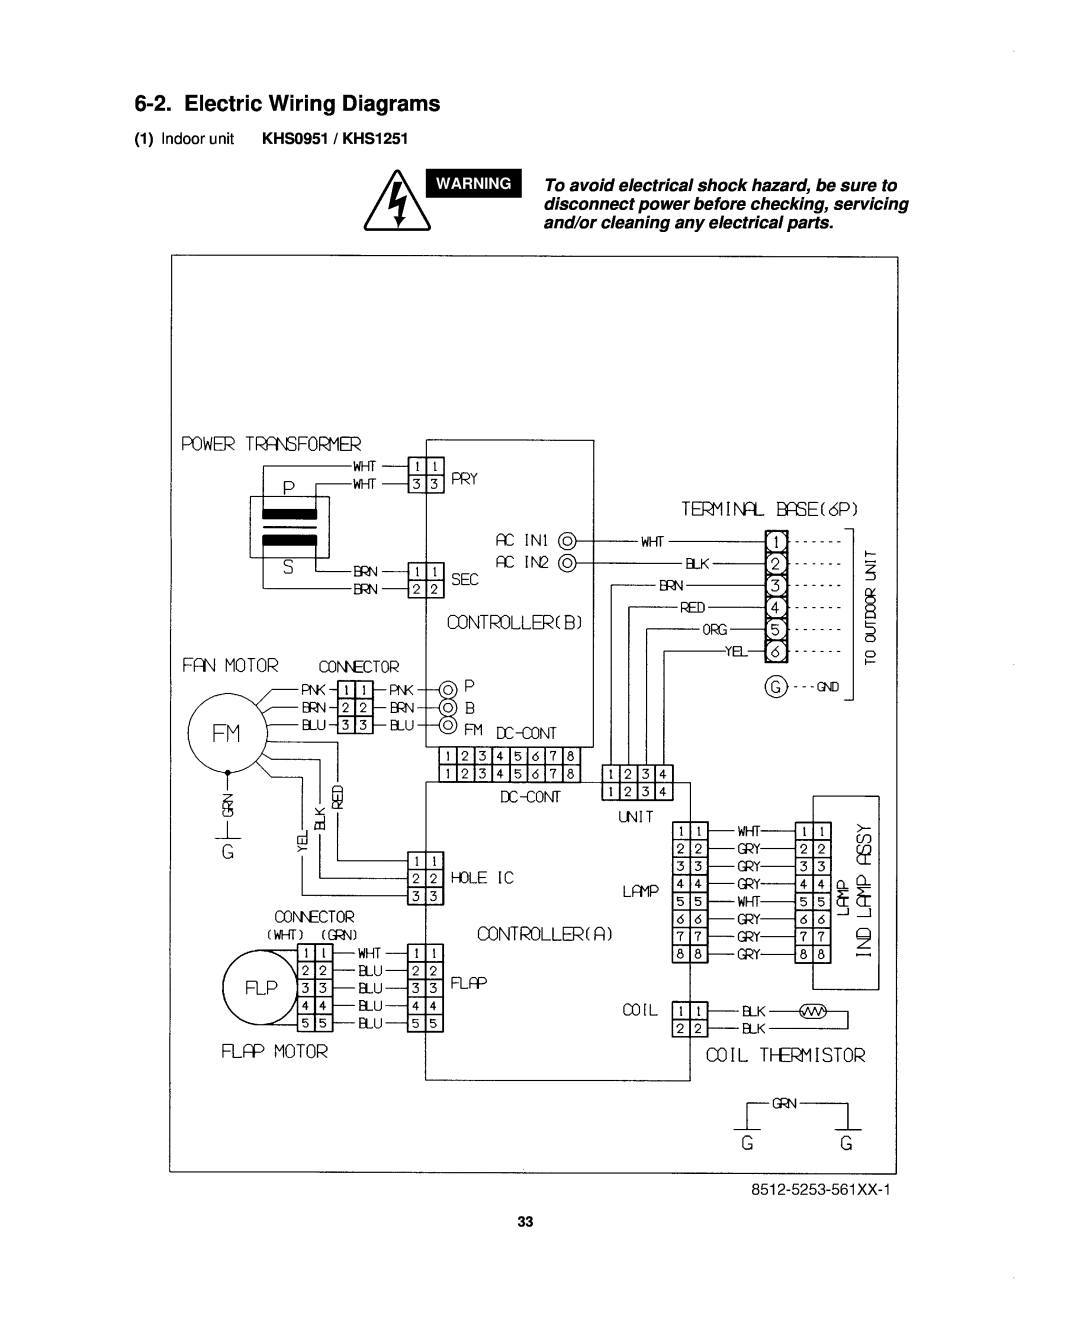 Sanyo CH0952, CH1852, KHS1852-S service manual Electric Wiring Diagrams, Indoor unit KHS0951 / KHS1251 